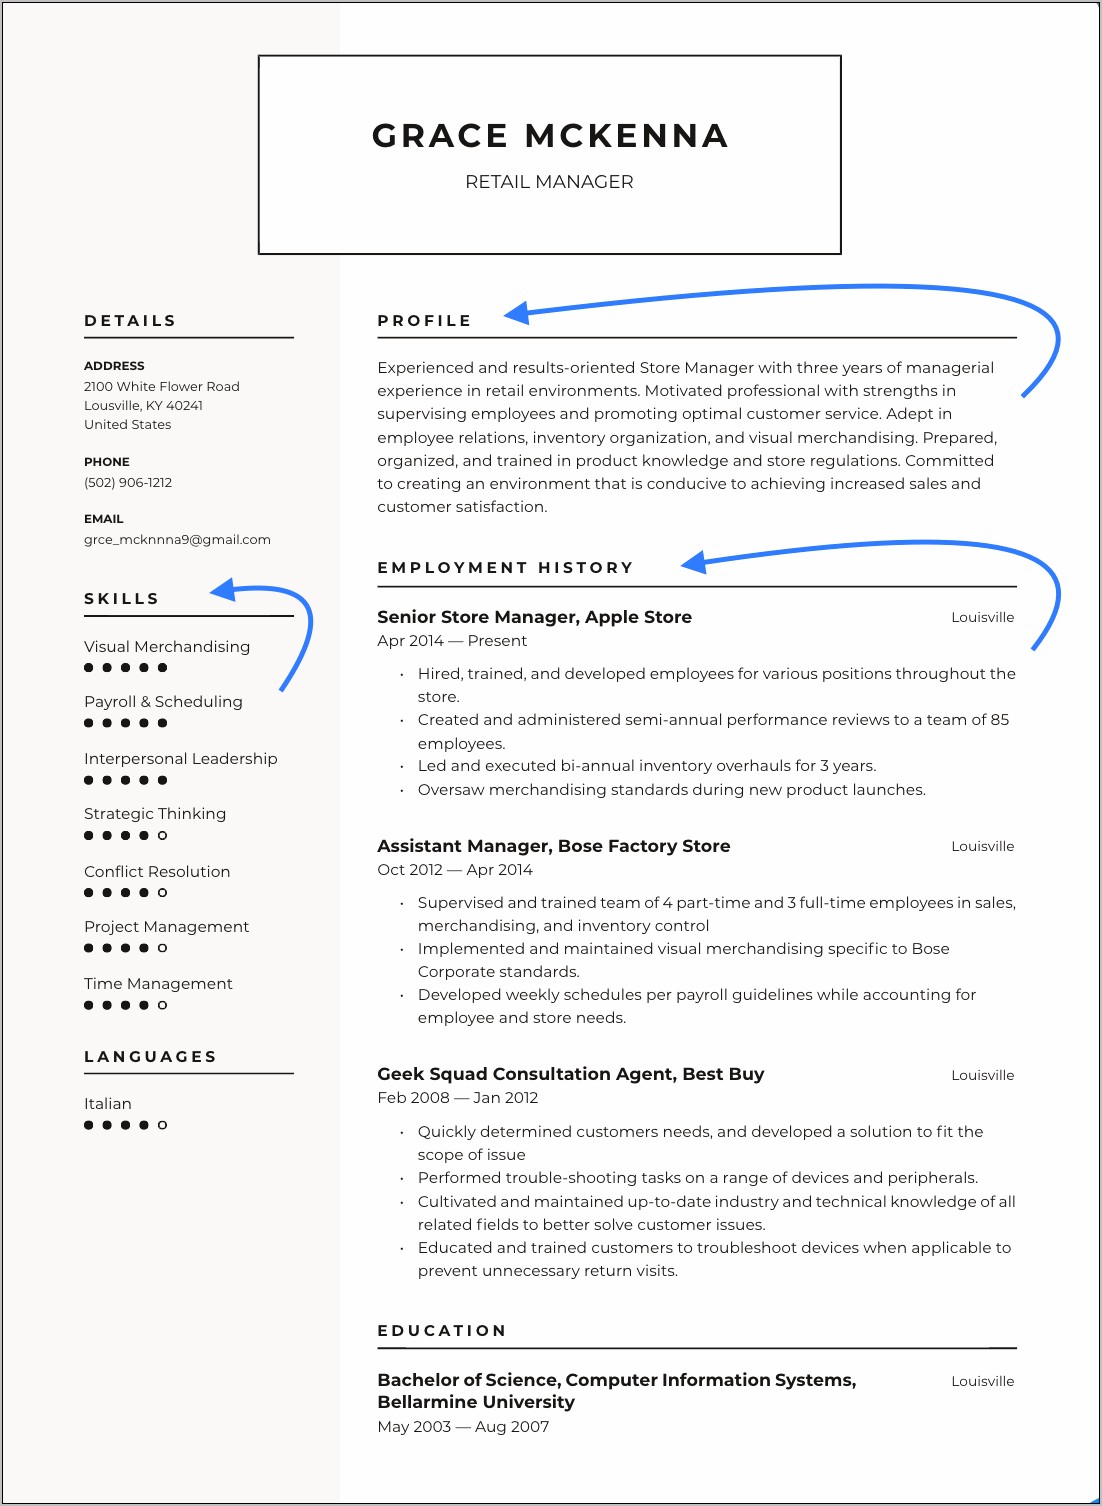 Computer Skills That Look Good On A Resume